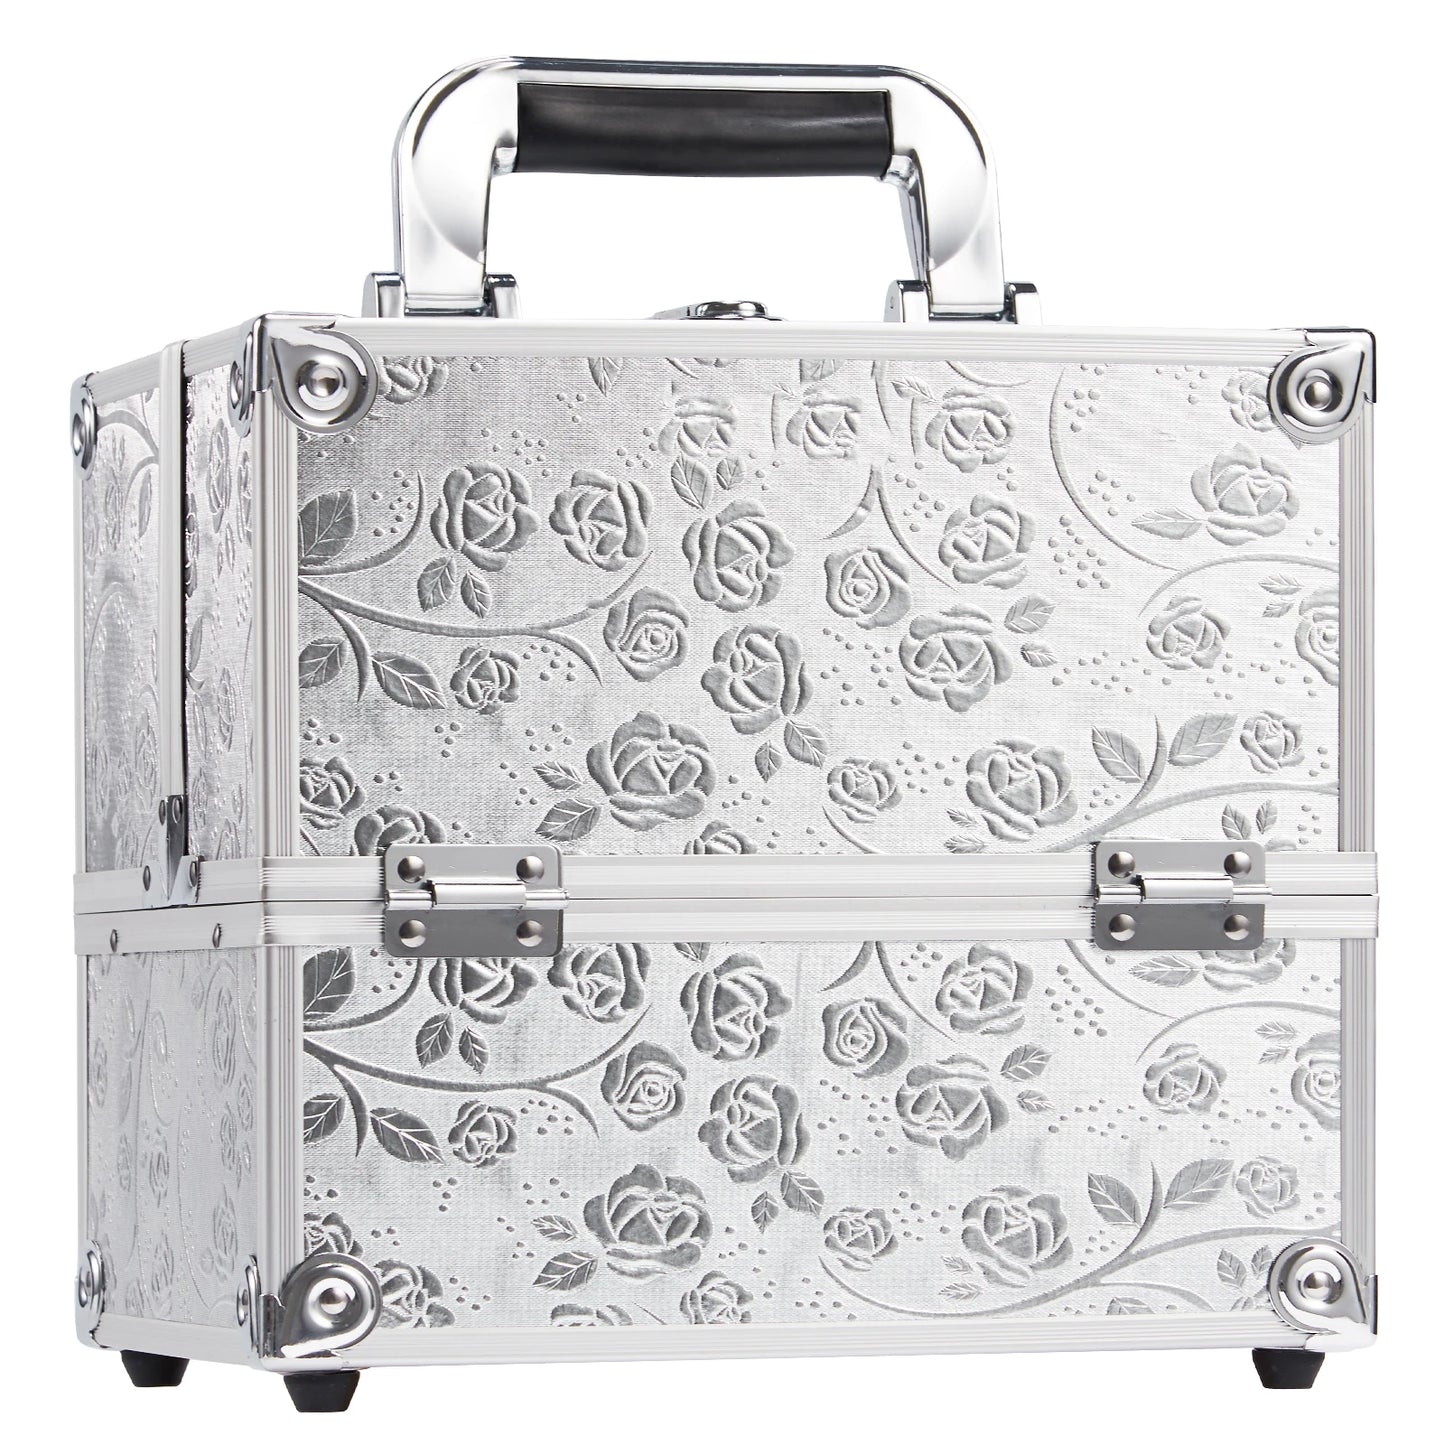 Portable travel, makeup case or organizer women's cosmetics, jewelry, and beauty products. - My Store